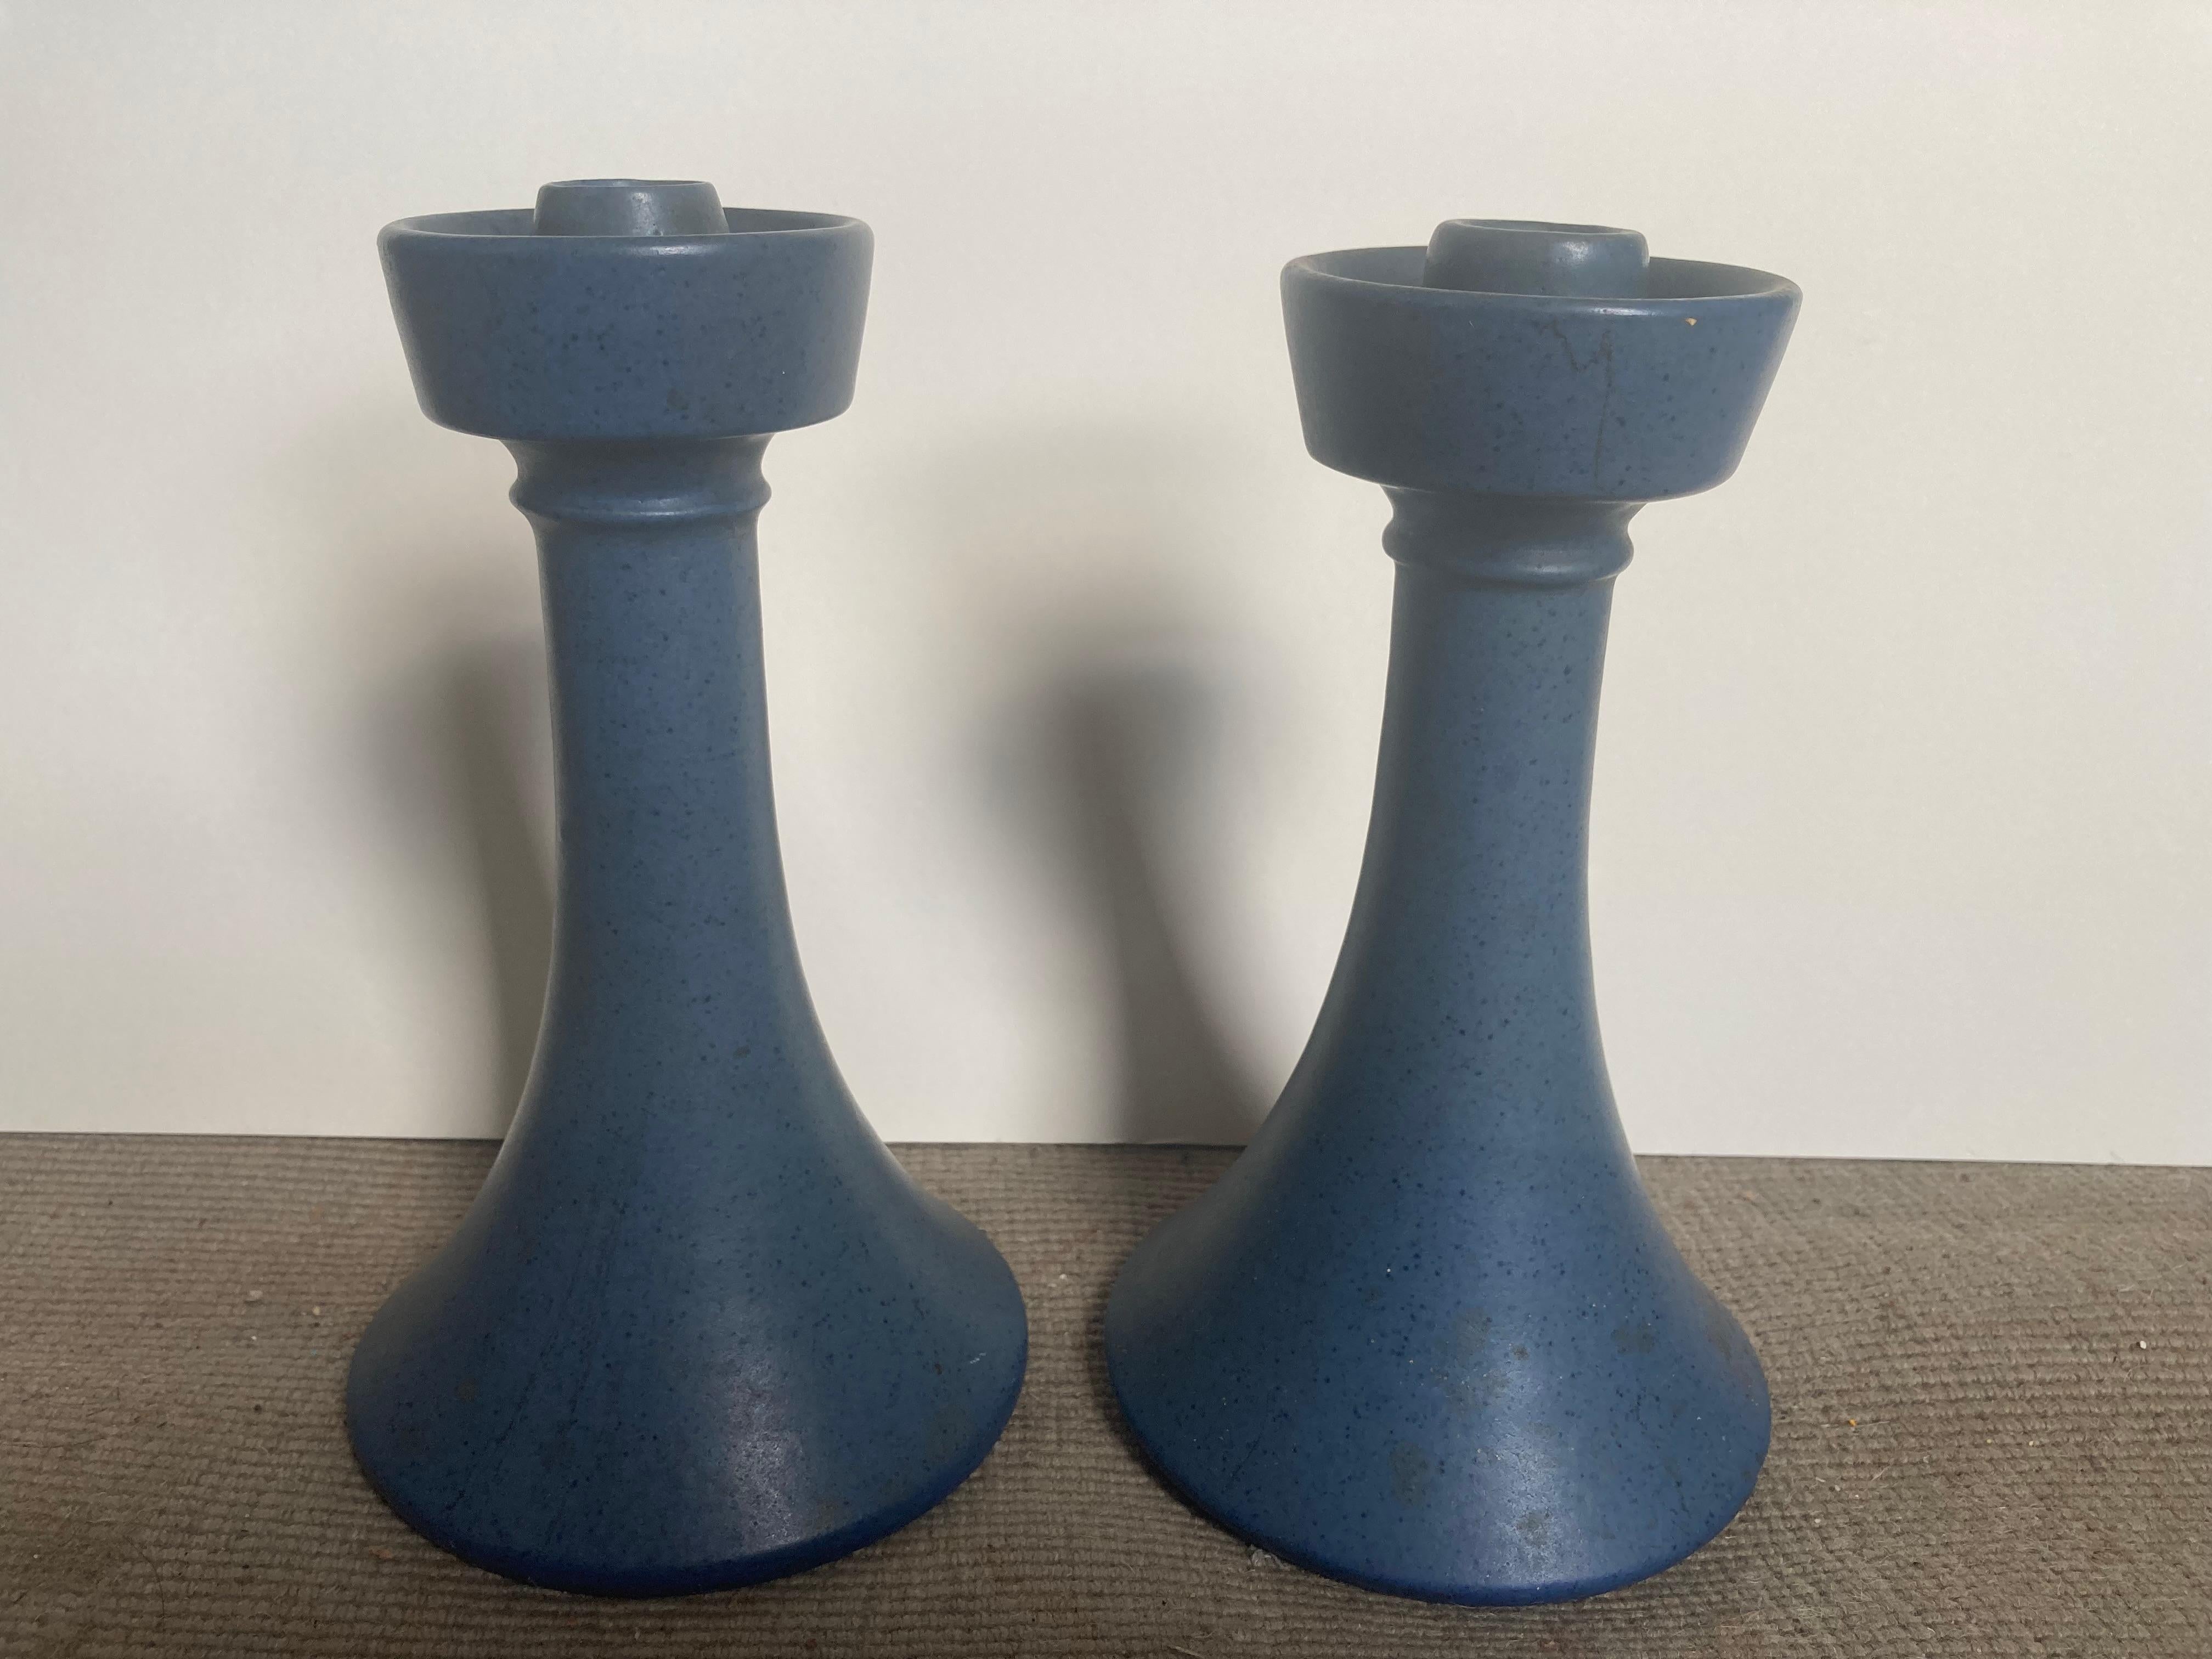 Newcomb Pottery Candlesticks, Great Condition, Flowers Estate (New Orleans) - Mixed Media Art by Joseph Meyer